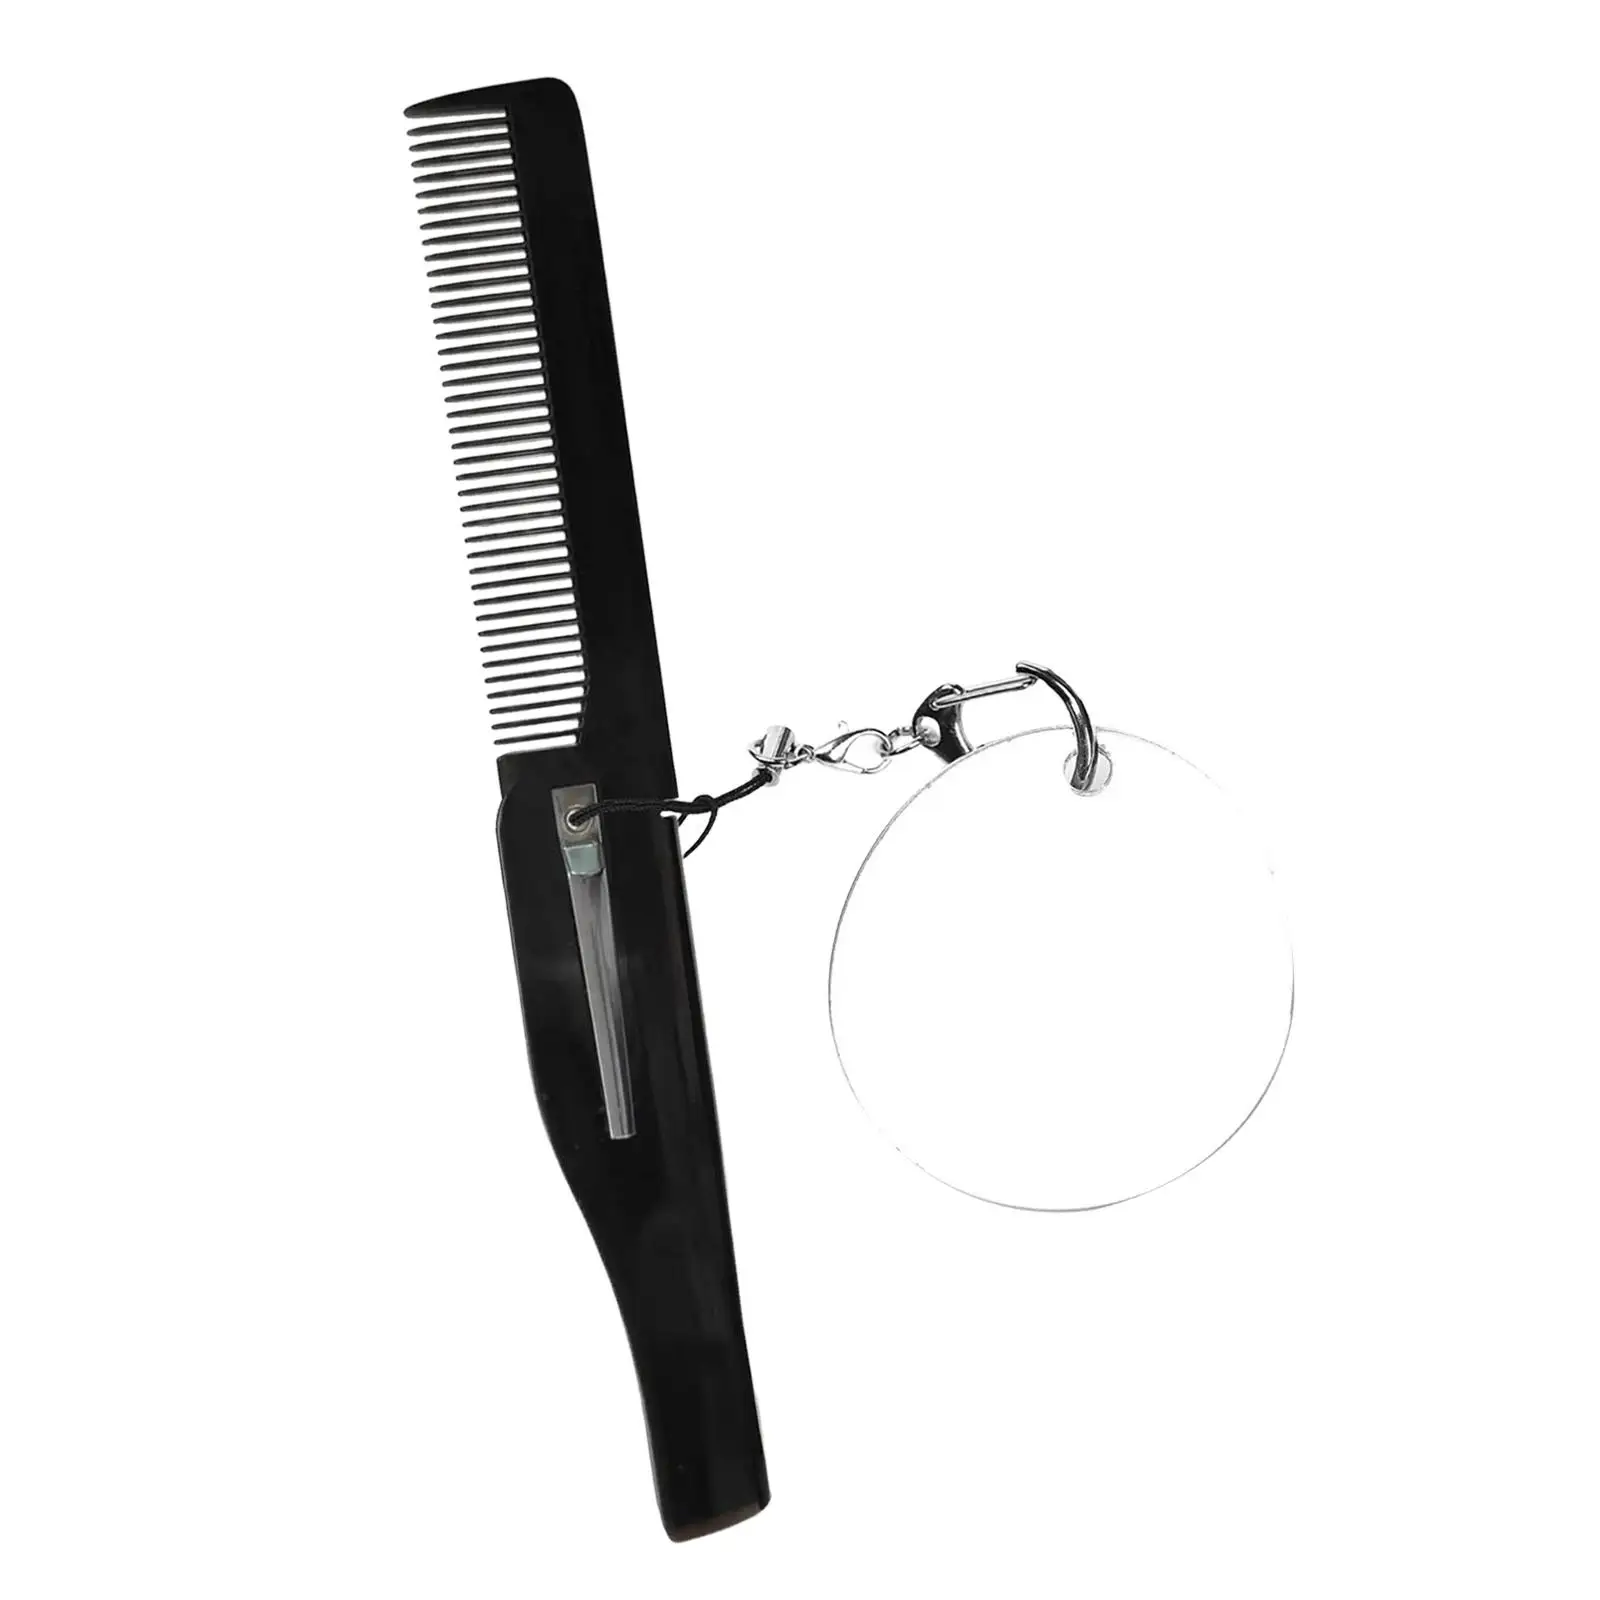 Pocket Folding Comb Everyday Grooming Styling Hair Easy to Use Accessory Beard Gift with Small Acrylic Mirror with Keychain